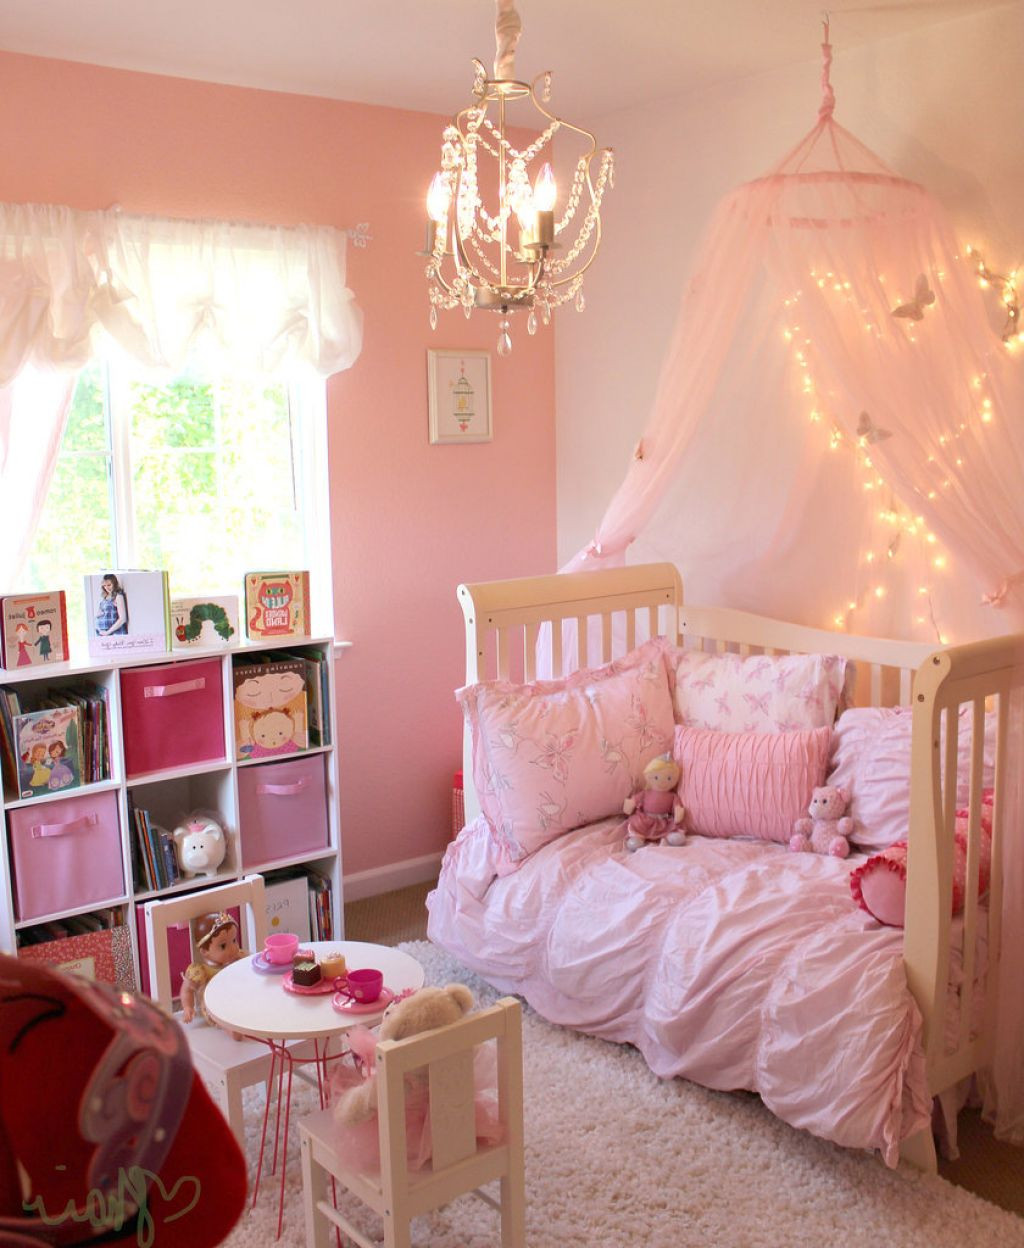 Princess Bedroom Decorating Ideas
 32 Dreamy Bedroom Designs For Your Little Princess